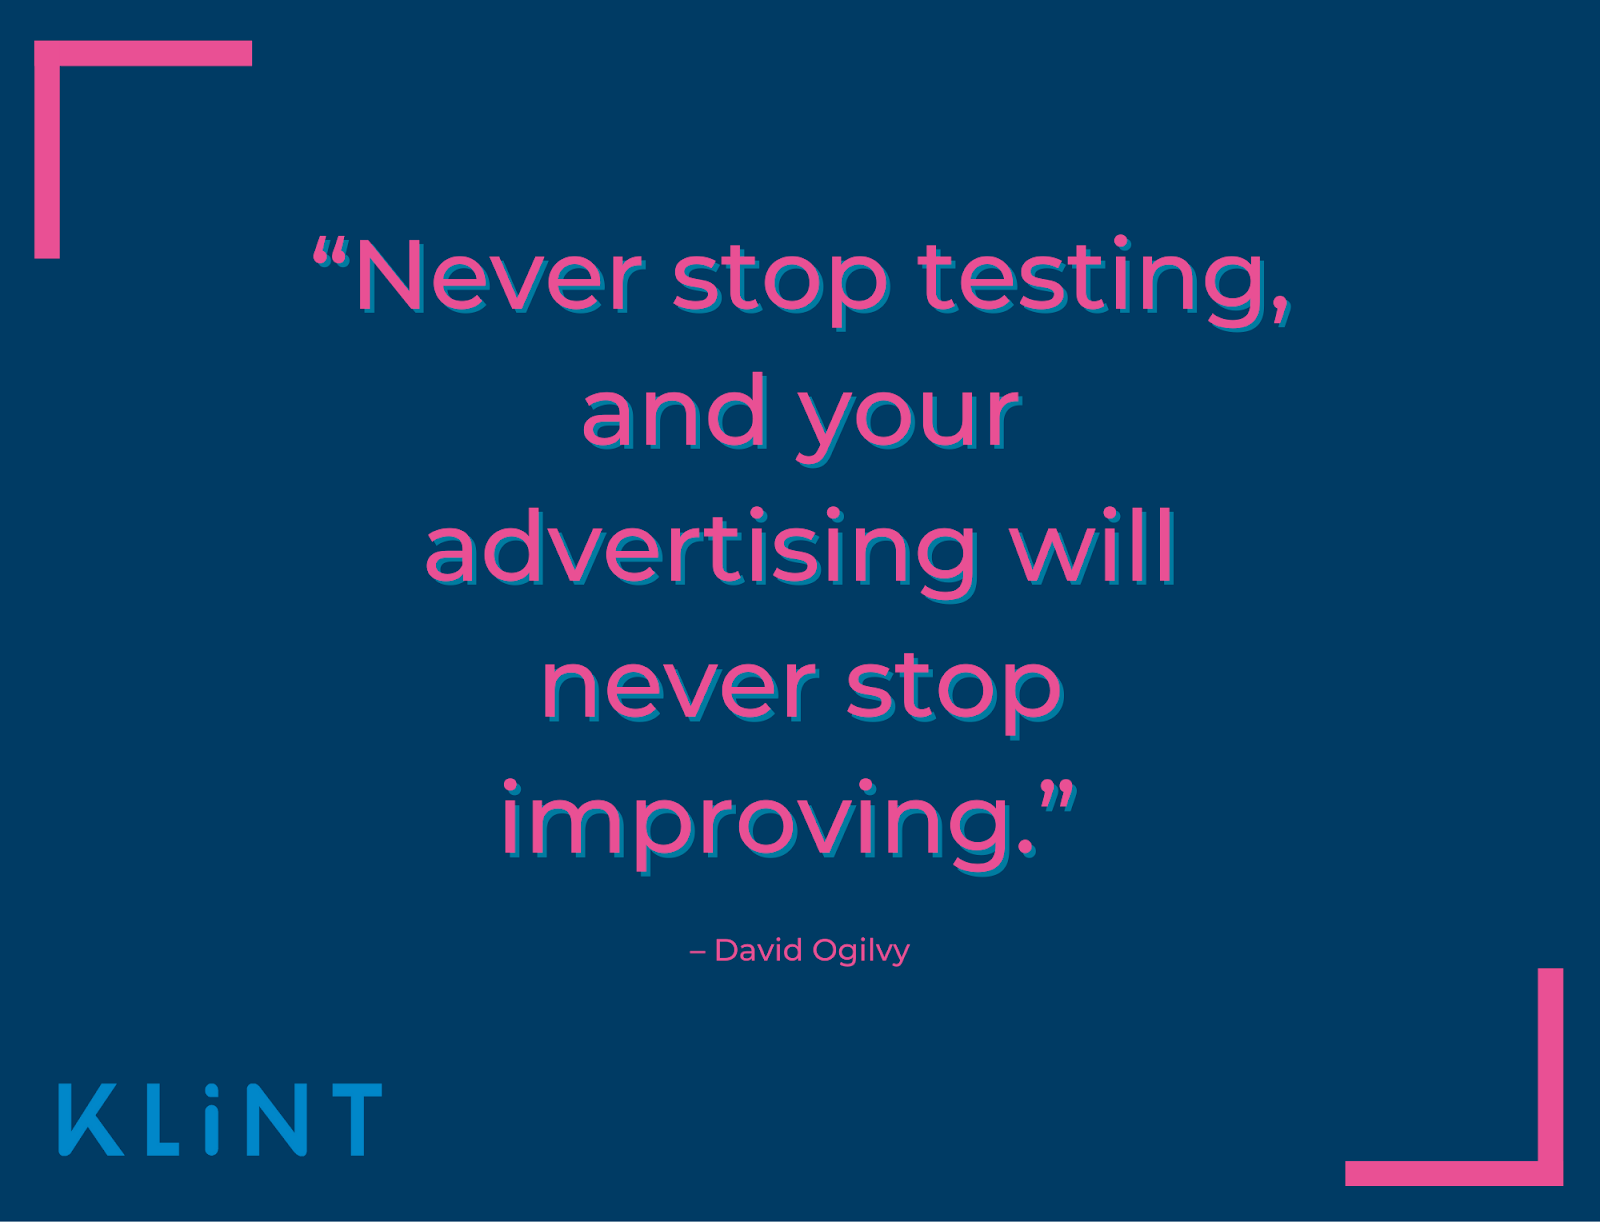 infographic with a quote by David Ogilvy